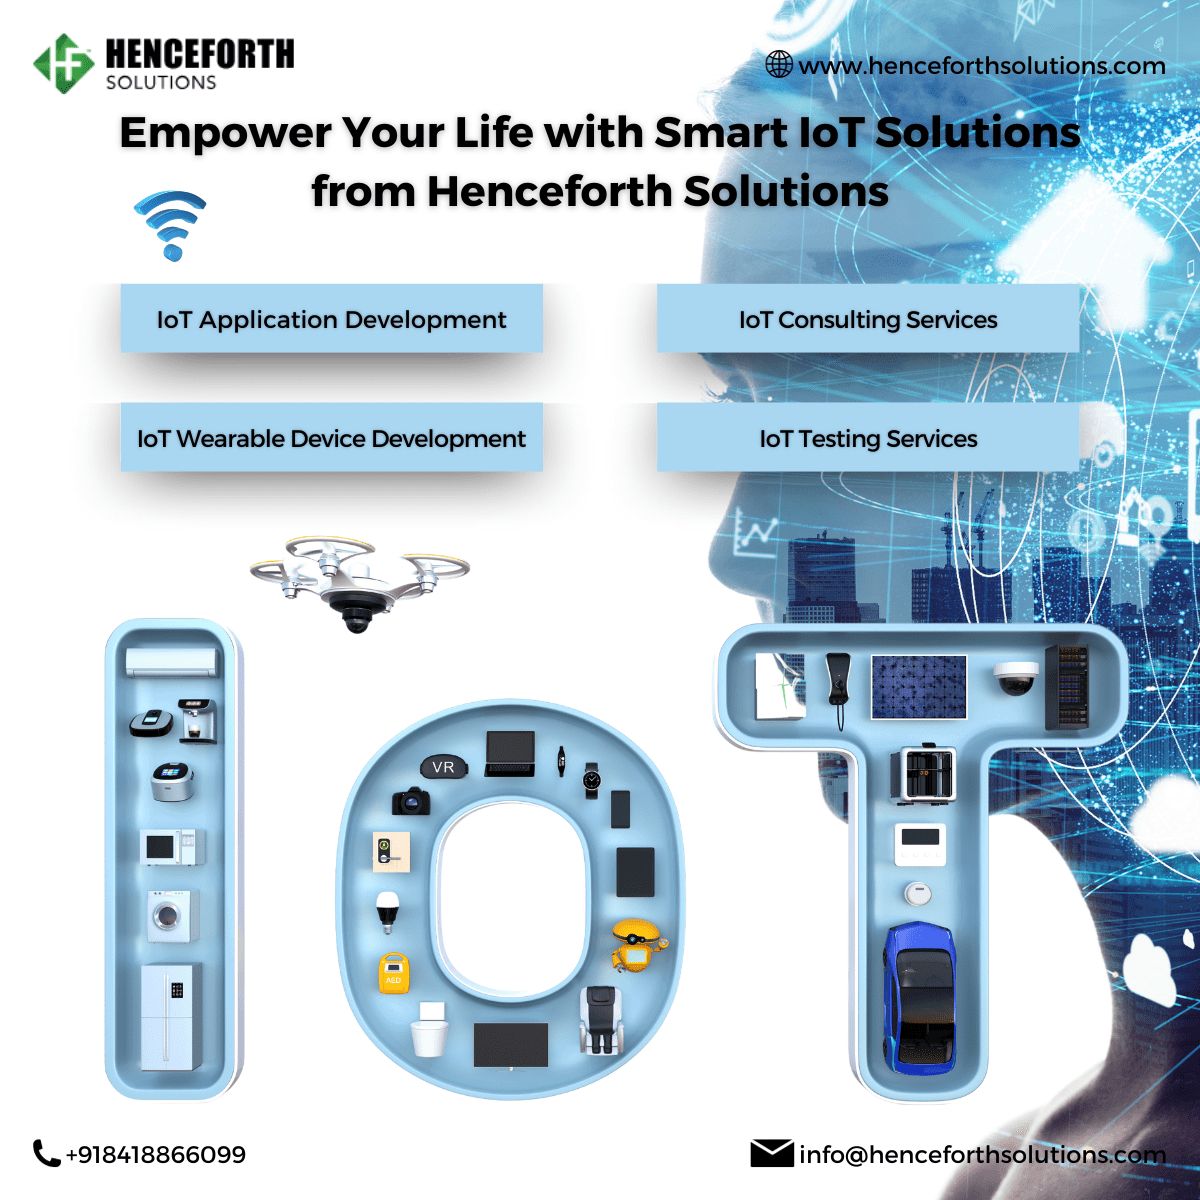 From Mastering IoT: Henceforth Solutions' Development Services